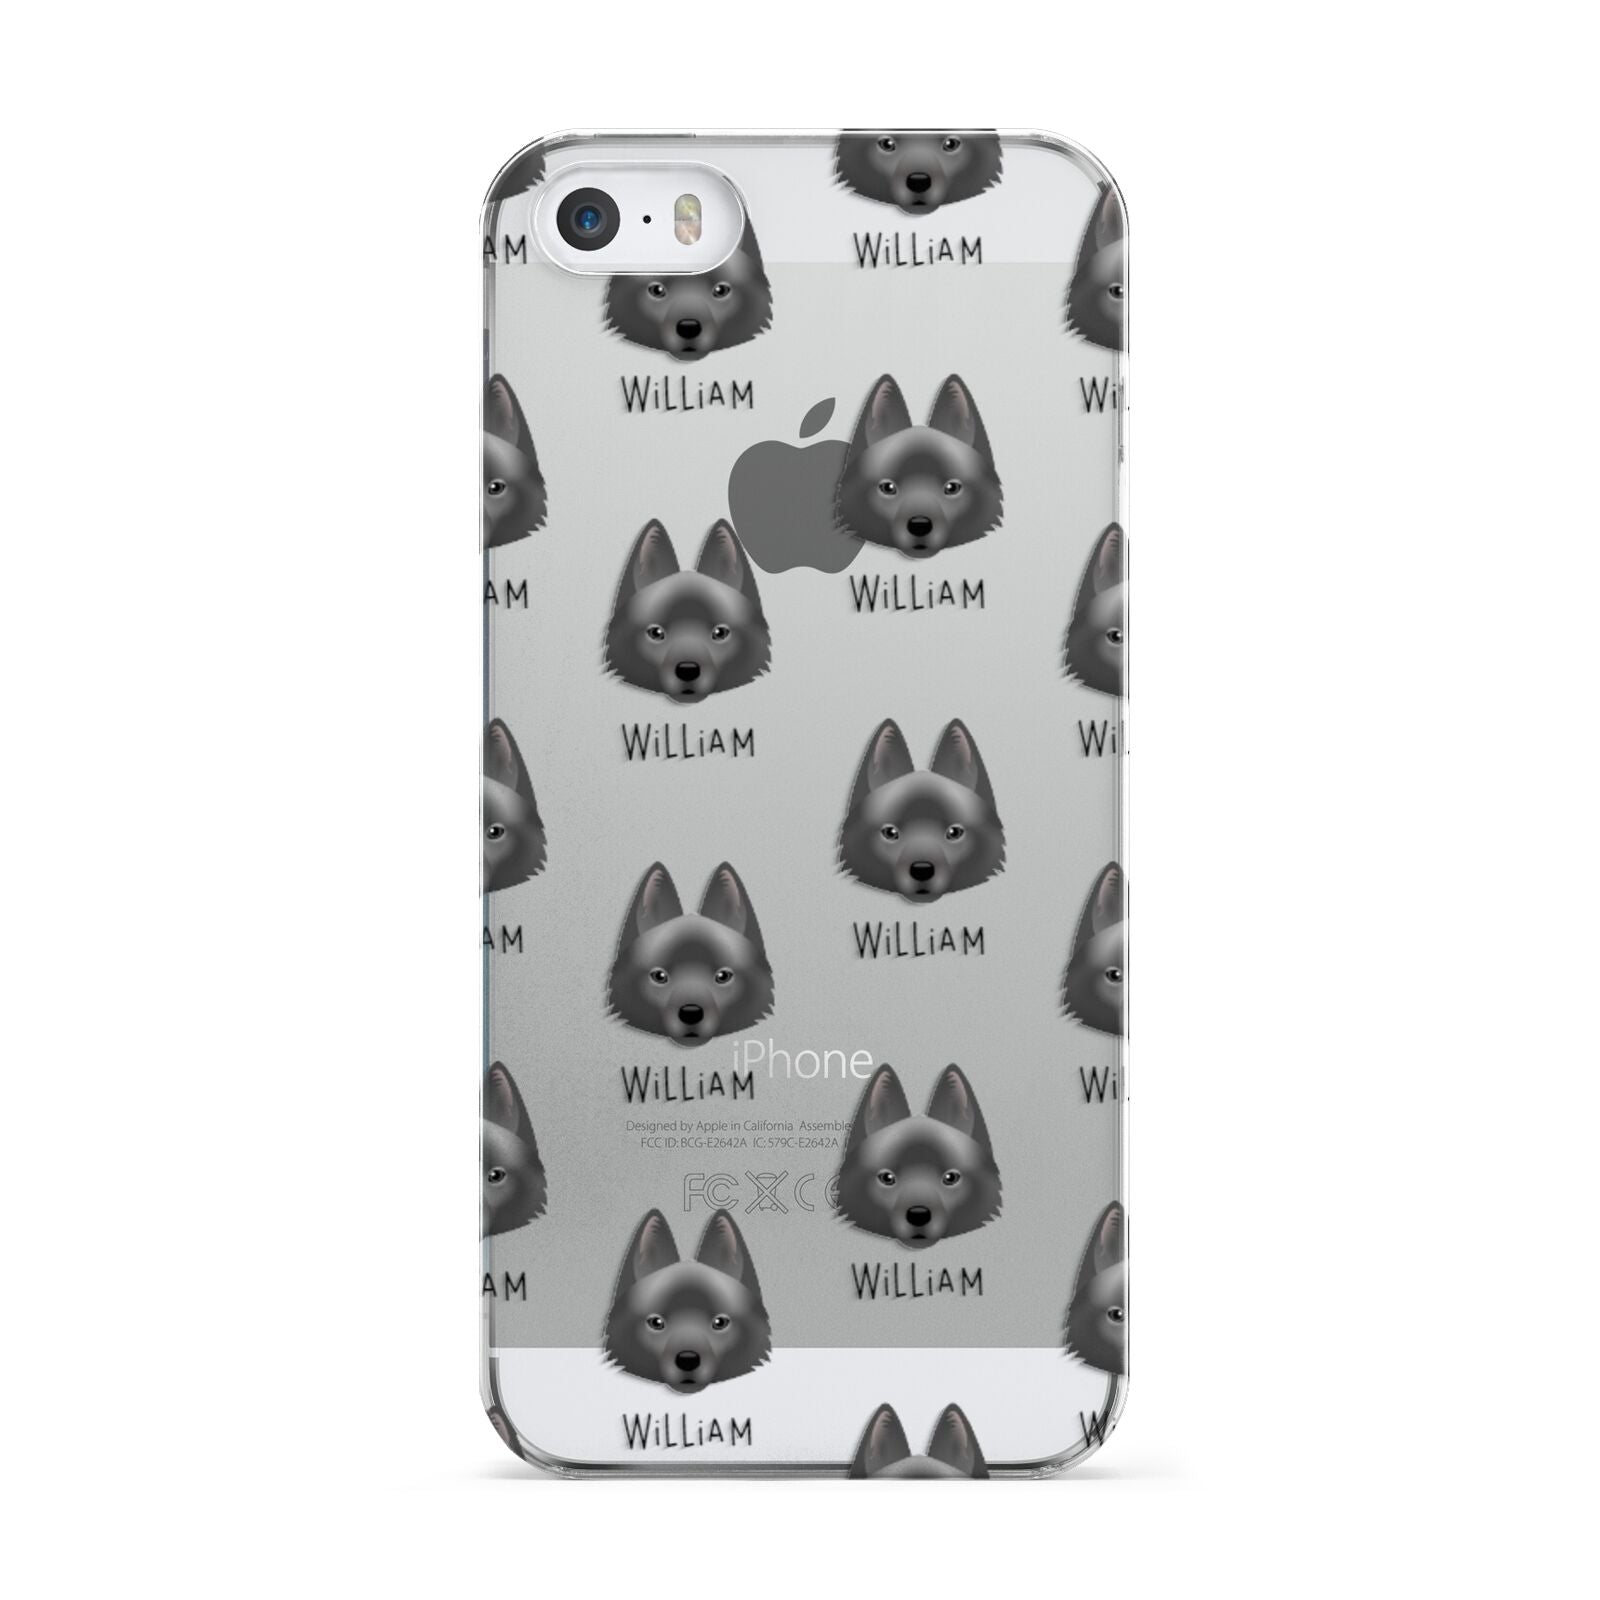 Schipperke Icon with Name Apple iPhone 5 Case